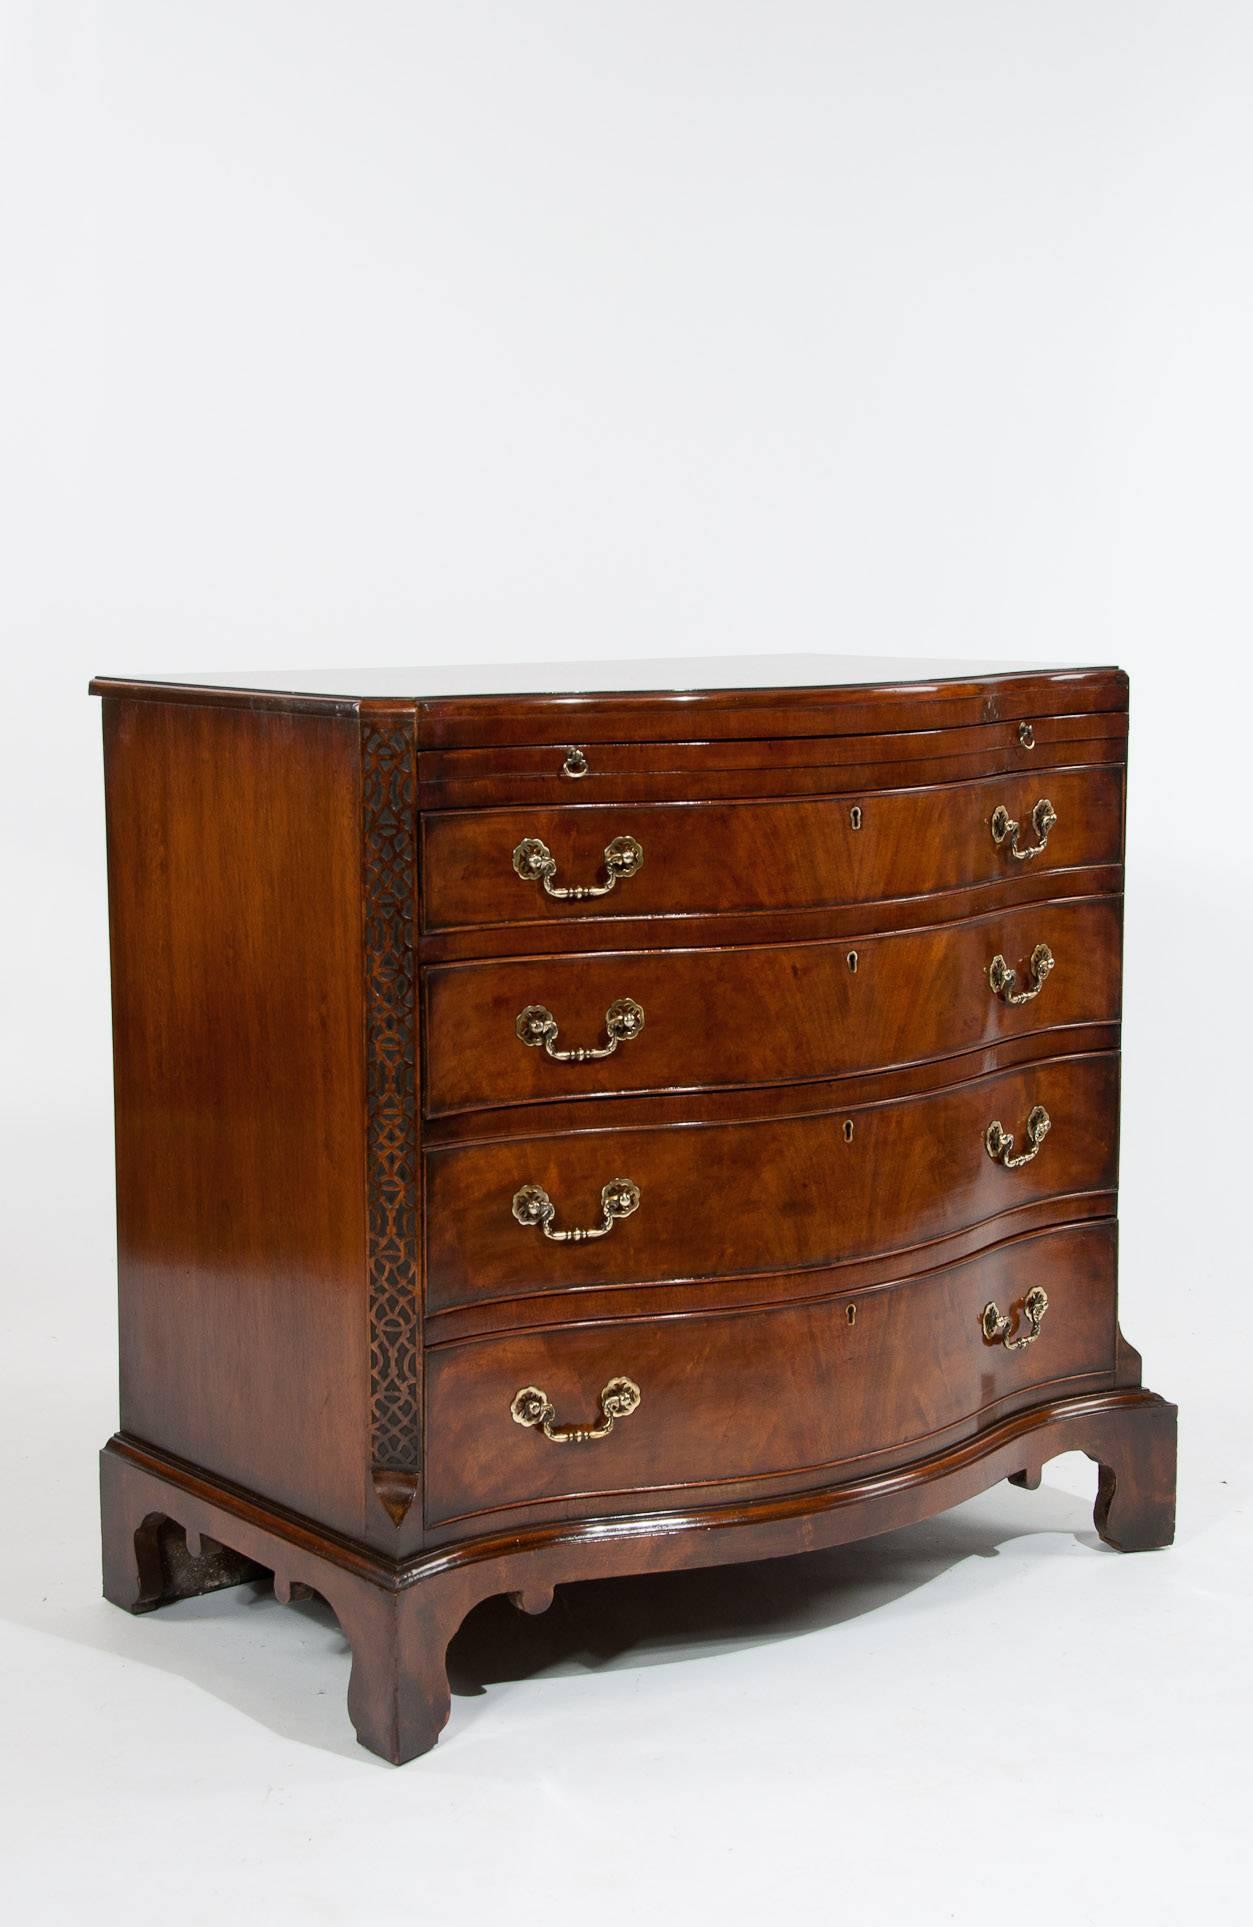 English Antique Mahogany Serpentine Chest of Drawers